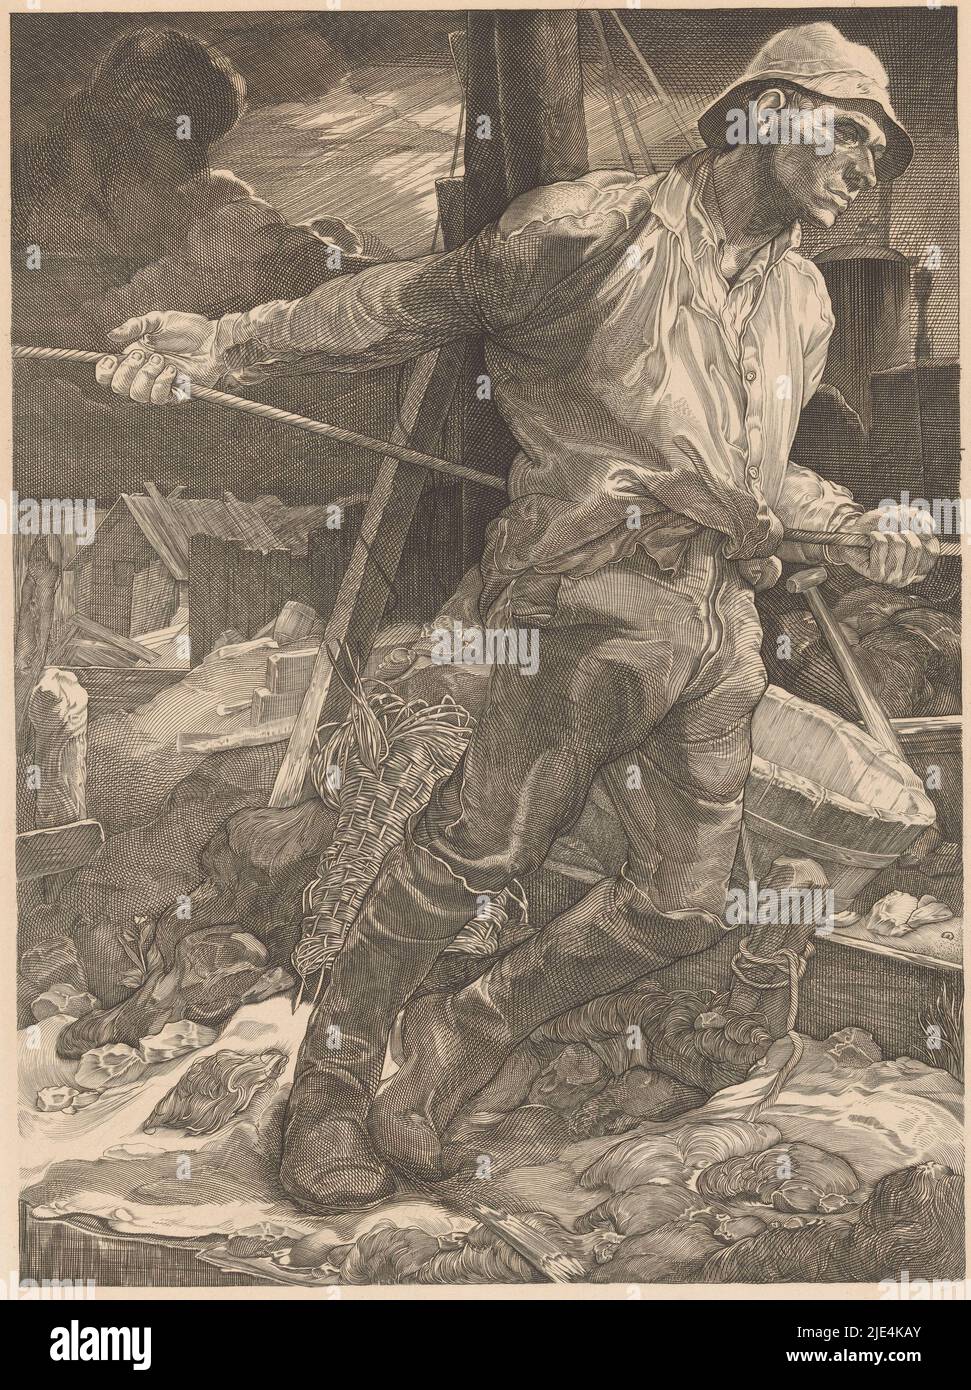 Worker letting a rope celebrate, Johannes Josephus Aarts, 1881 - 1934, A worker wearing a hat and boots lets a rope celebrate. In the background, among other things, a shovel, a tub, a fence, a hut and a machine., print maker: Johannes Josephus Aarts, 1881 - 1934, paper, engraving, h 339 mm × w 245 mm Stock Photo